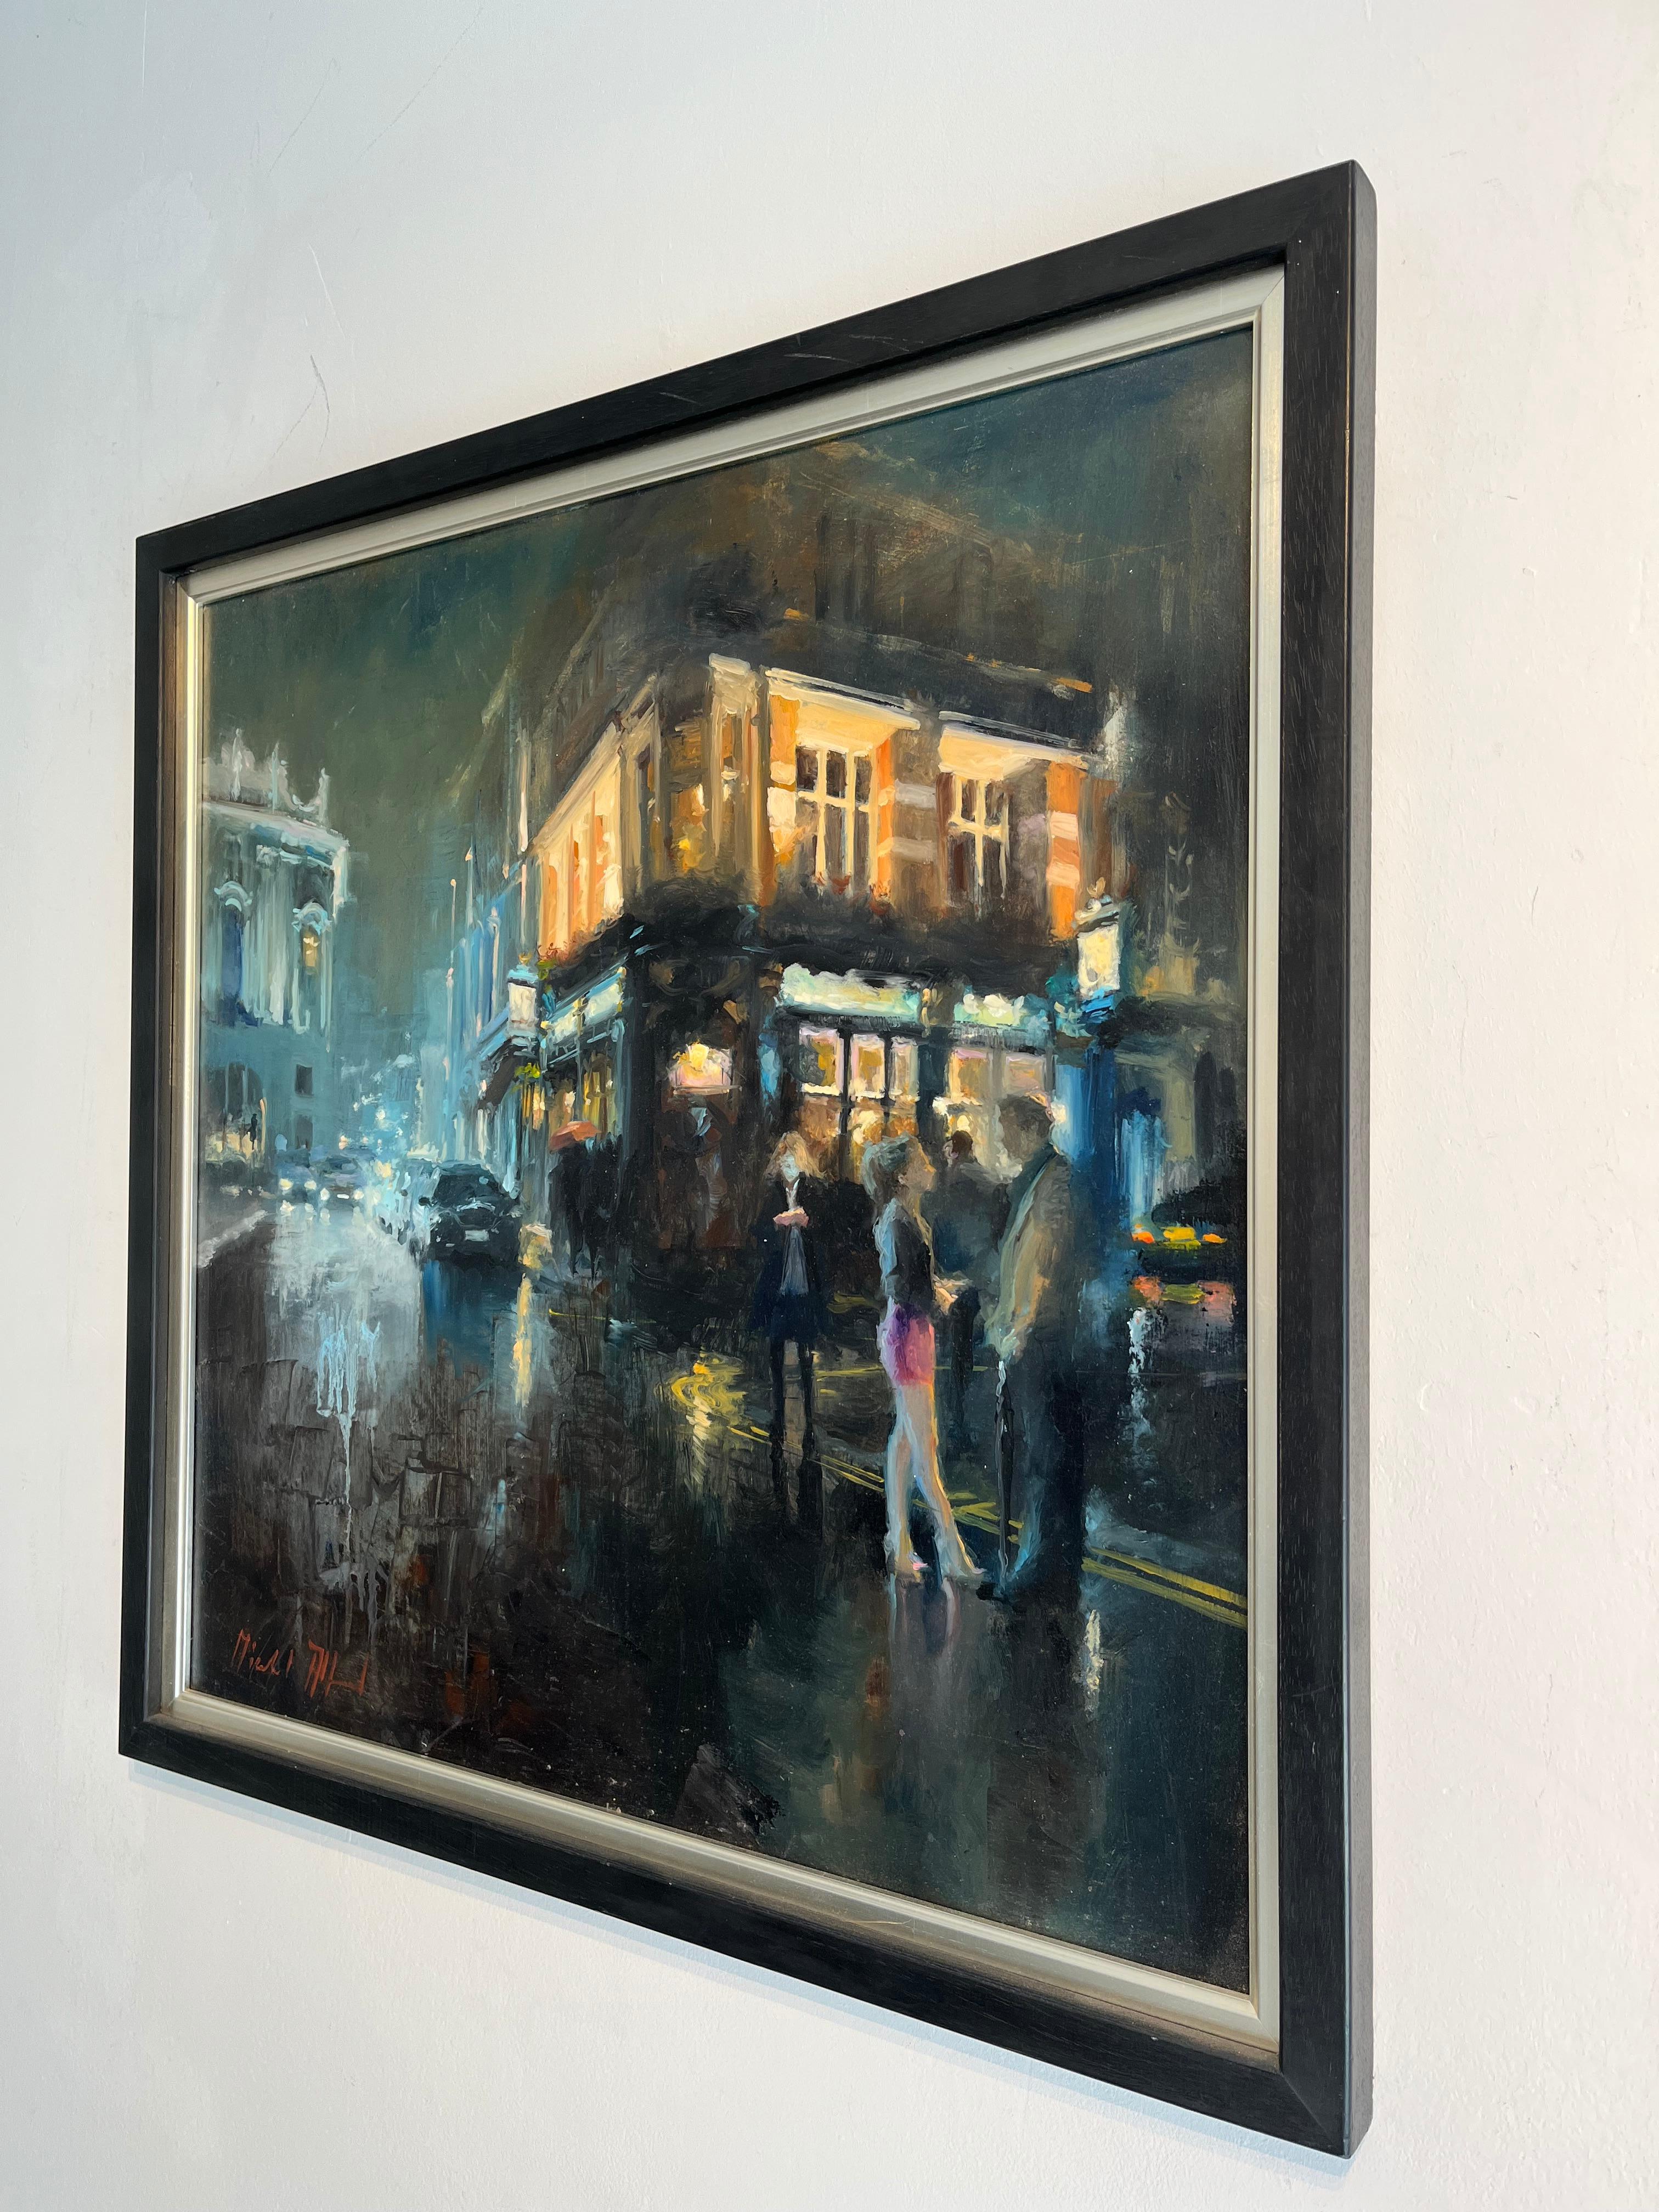 If on a Winters Night I-original impressionism London cityscape oil painting-Art - Impressionist Painting by Michael Alford